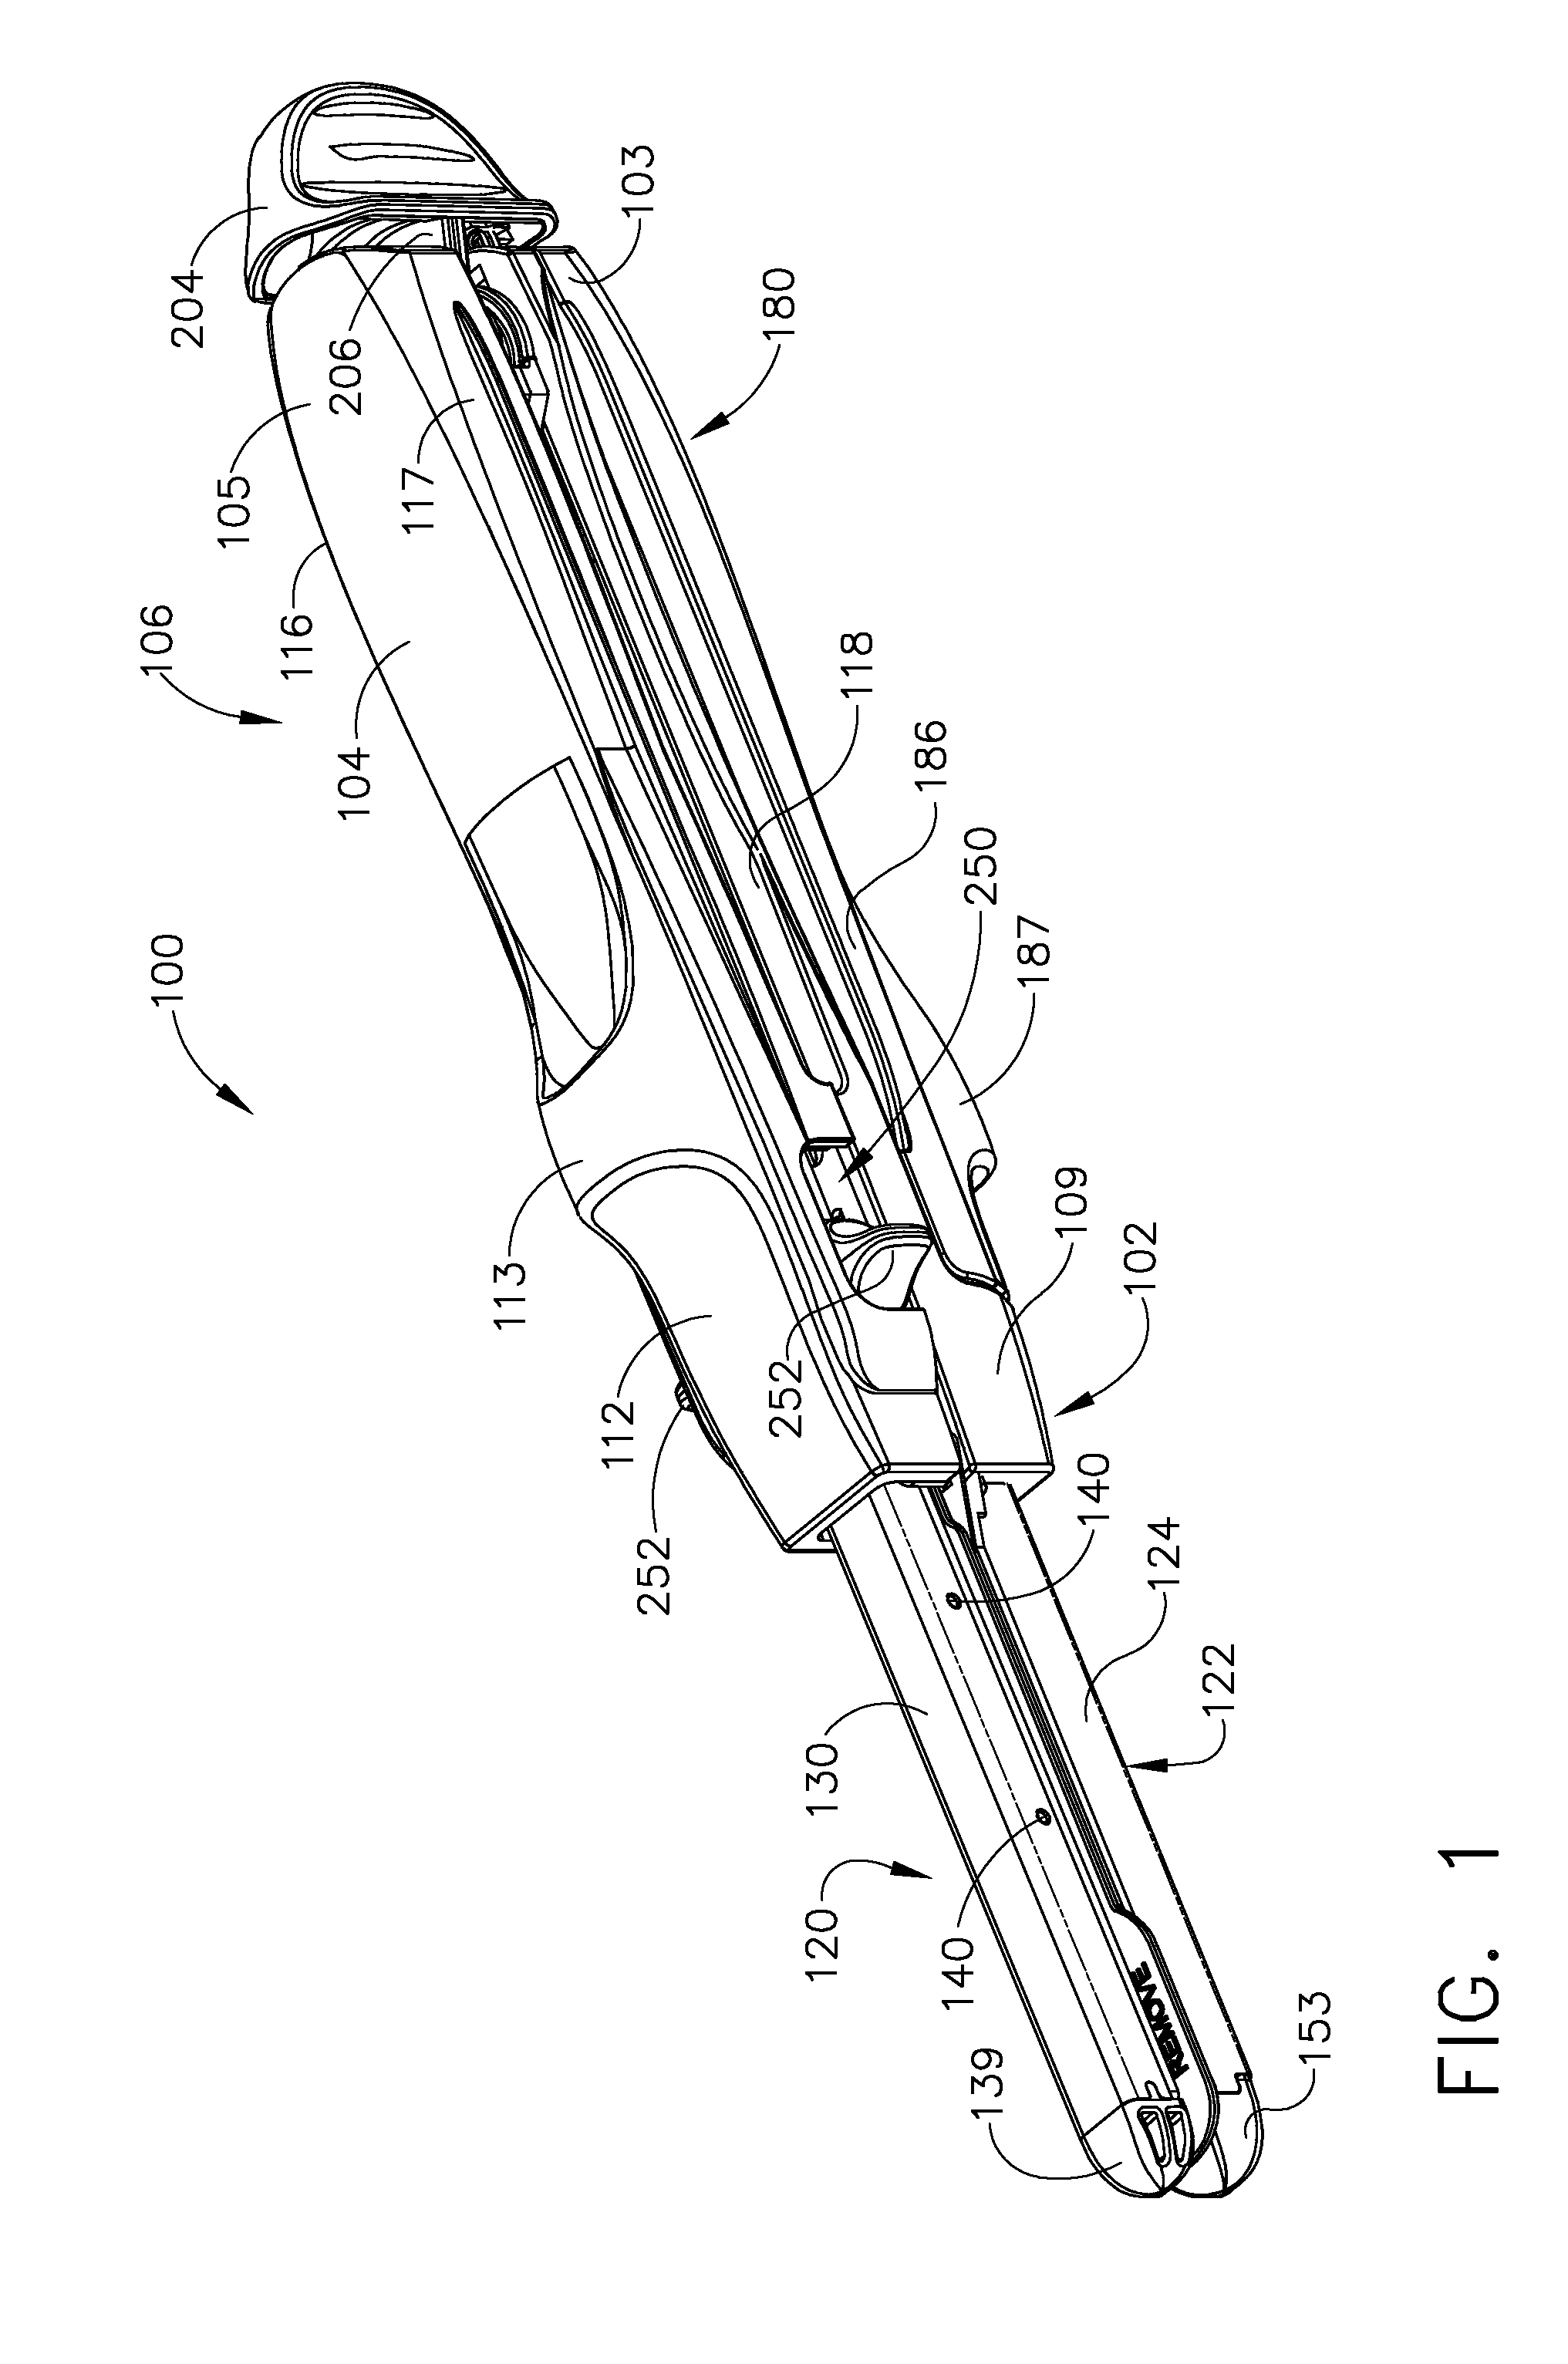 Surgical stapling instrument with cutting member arrangement